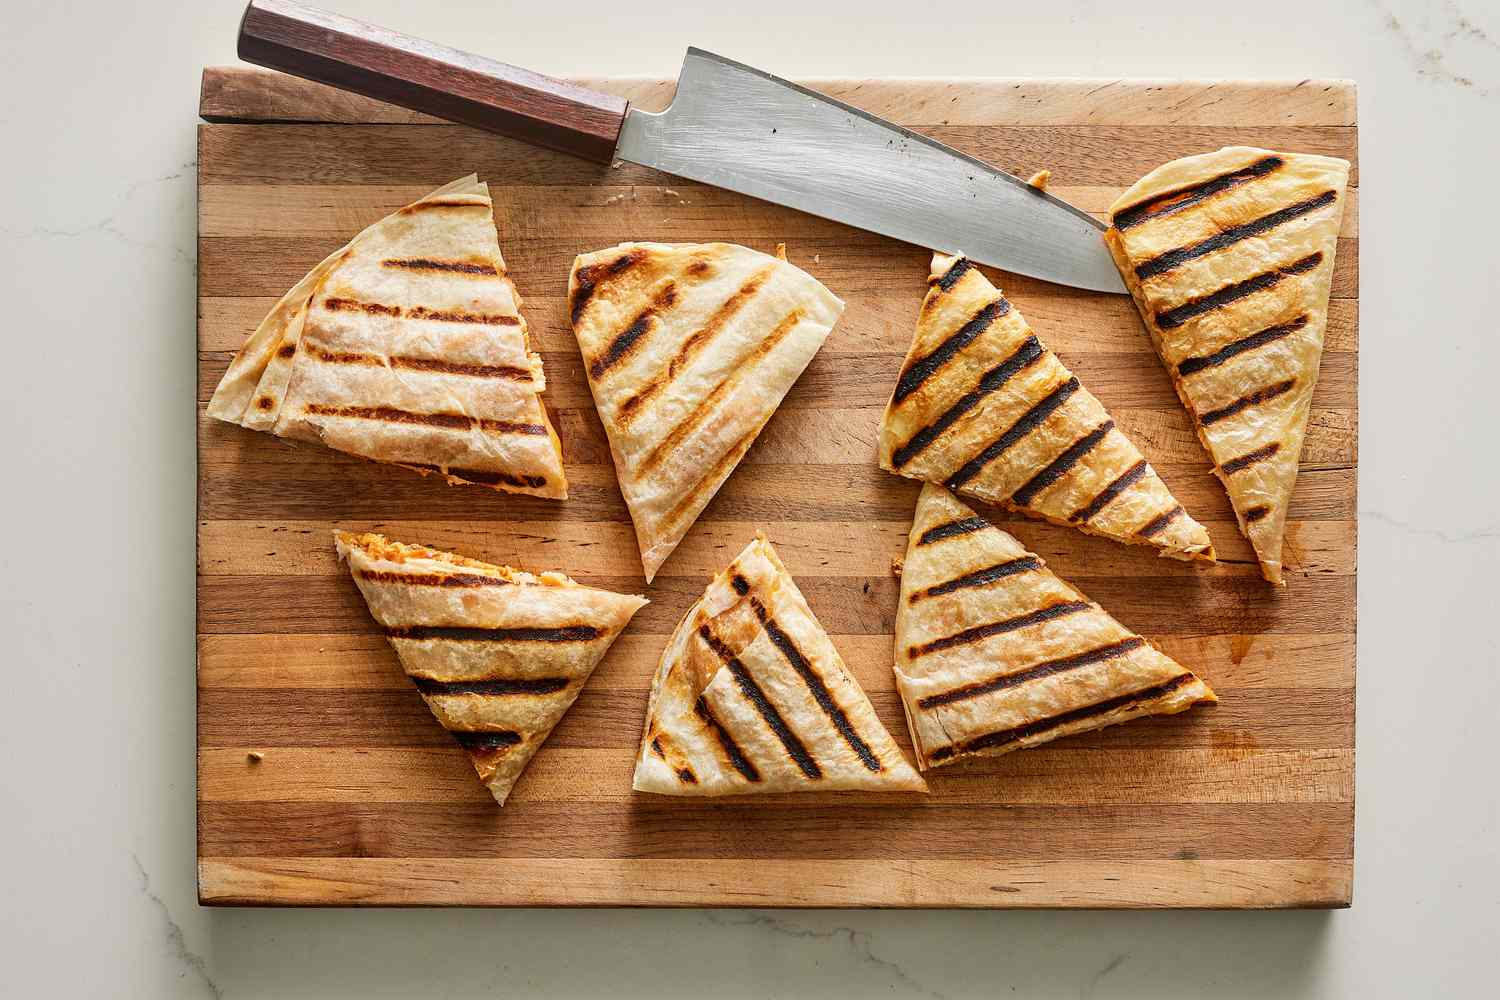 A cutting board with a knife and small wedges of grilled quesadillas